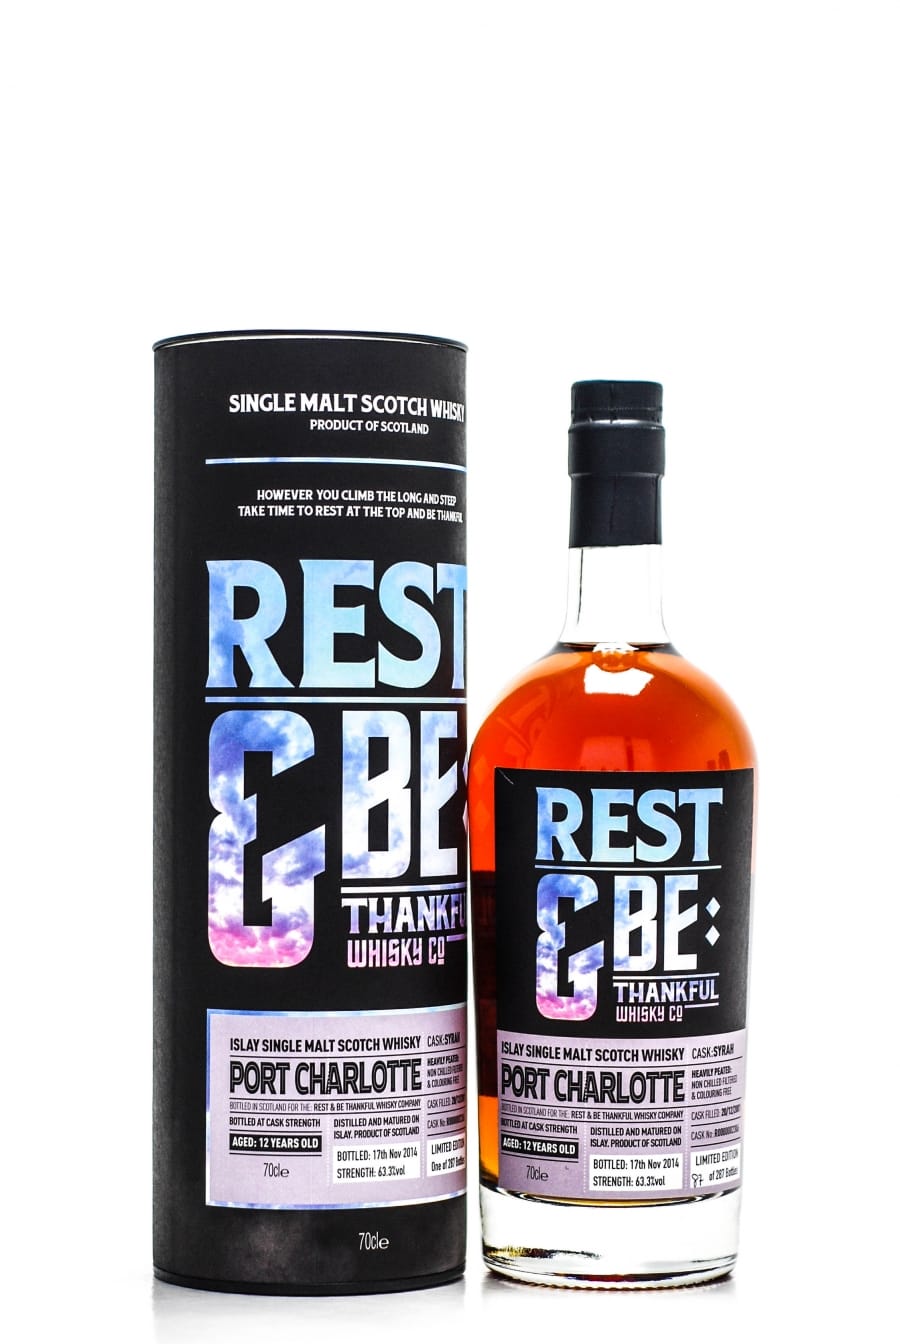 Port Charlotte - 12 Years Old Rest & be Thankful Whisky Company Cask:R0000002306 63.3% 2001 In Original Container